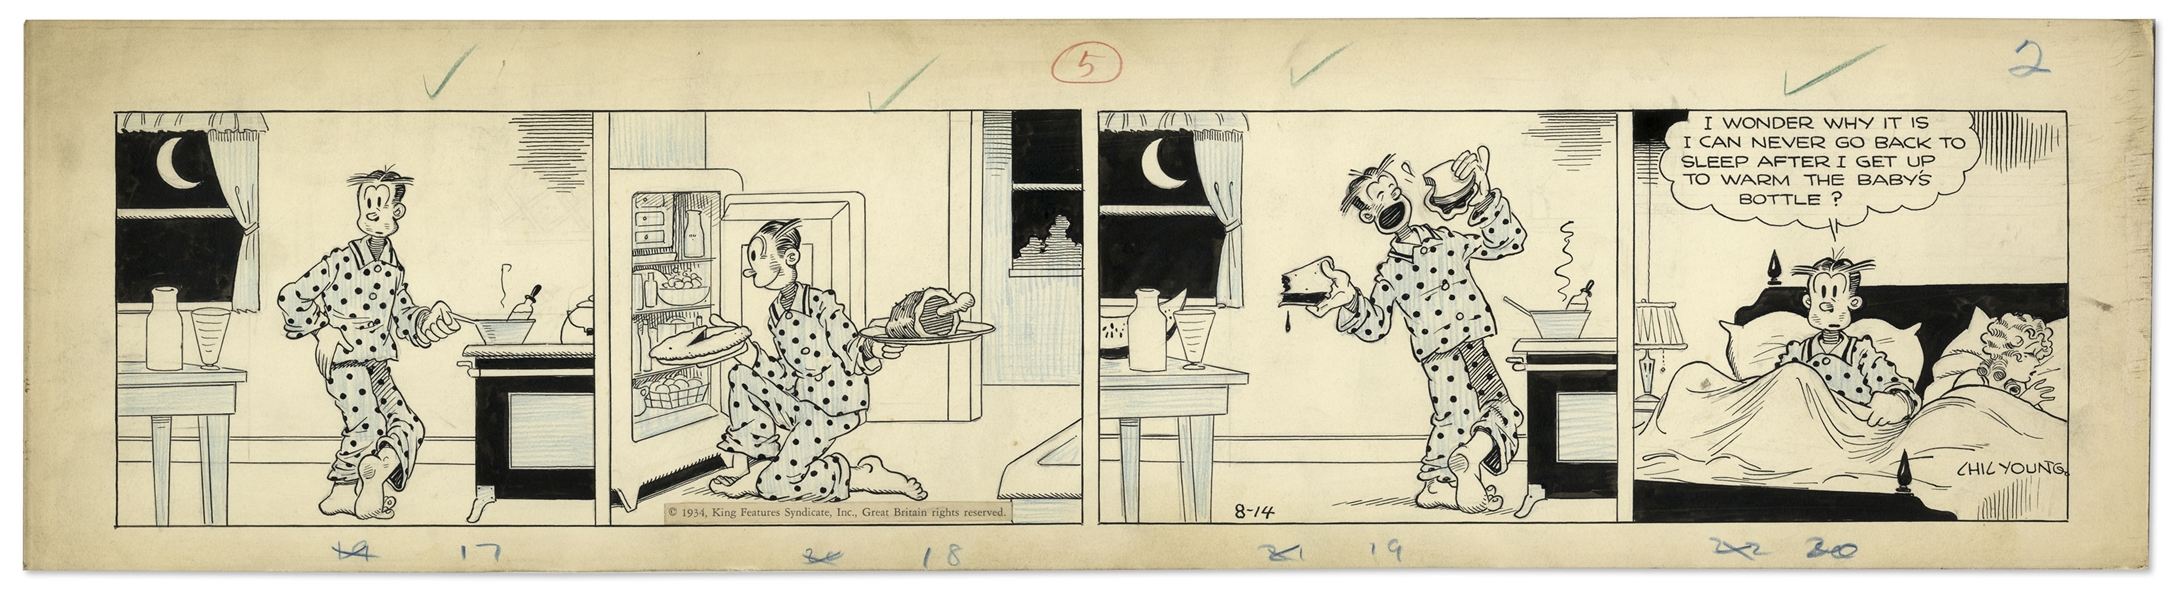 Chic Young Hand-Drawn ''Blondie'' Comic Strip From 1934 Titled ''Excess Baggage'' -- Dagwood Raids the Fridge While Warming Baby Dumpling's Bottle